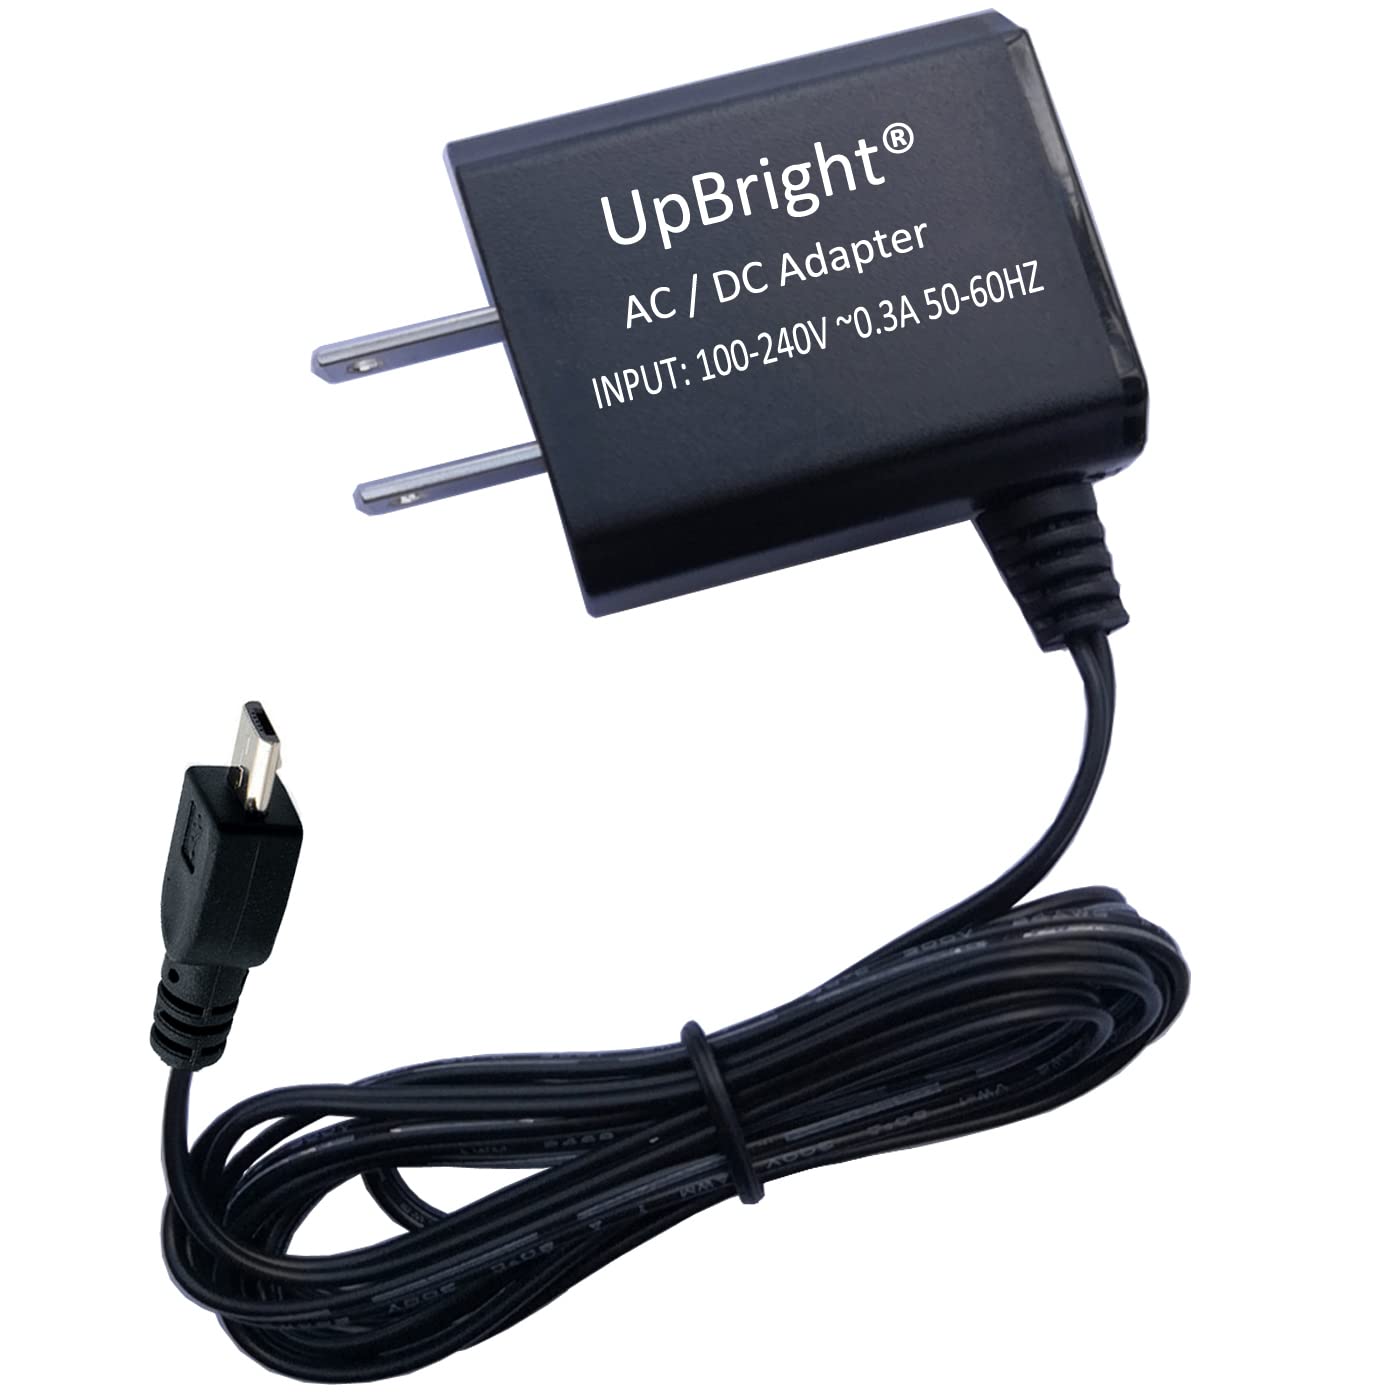 UpBright Micro USB 5V AC/DC Adapter Compatible with LIVAROCI U81Q Blood Pressure Monitor Cuff Upper Arm LED Screen Automatic Digital Blood Pressure Machine 5VDC Power Supply Cord Cable Battery Charger